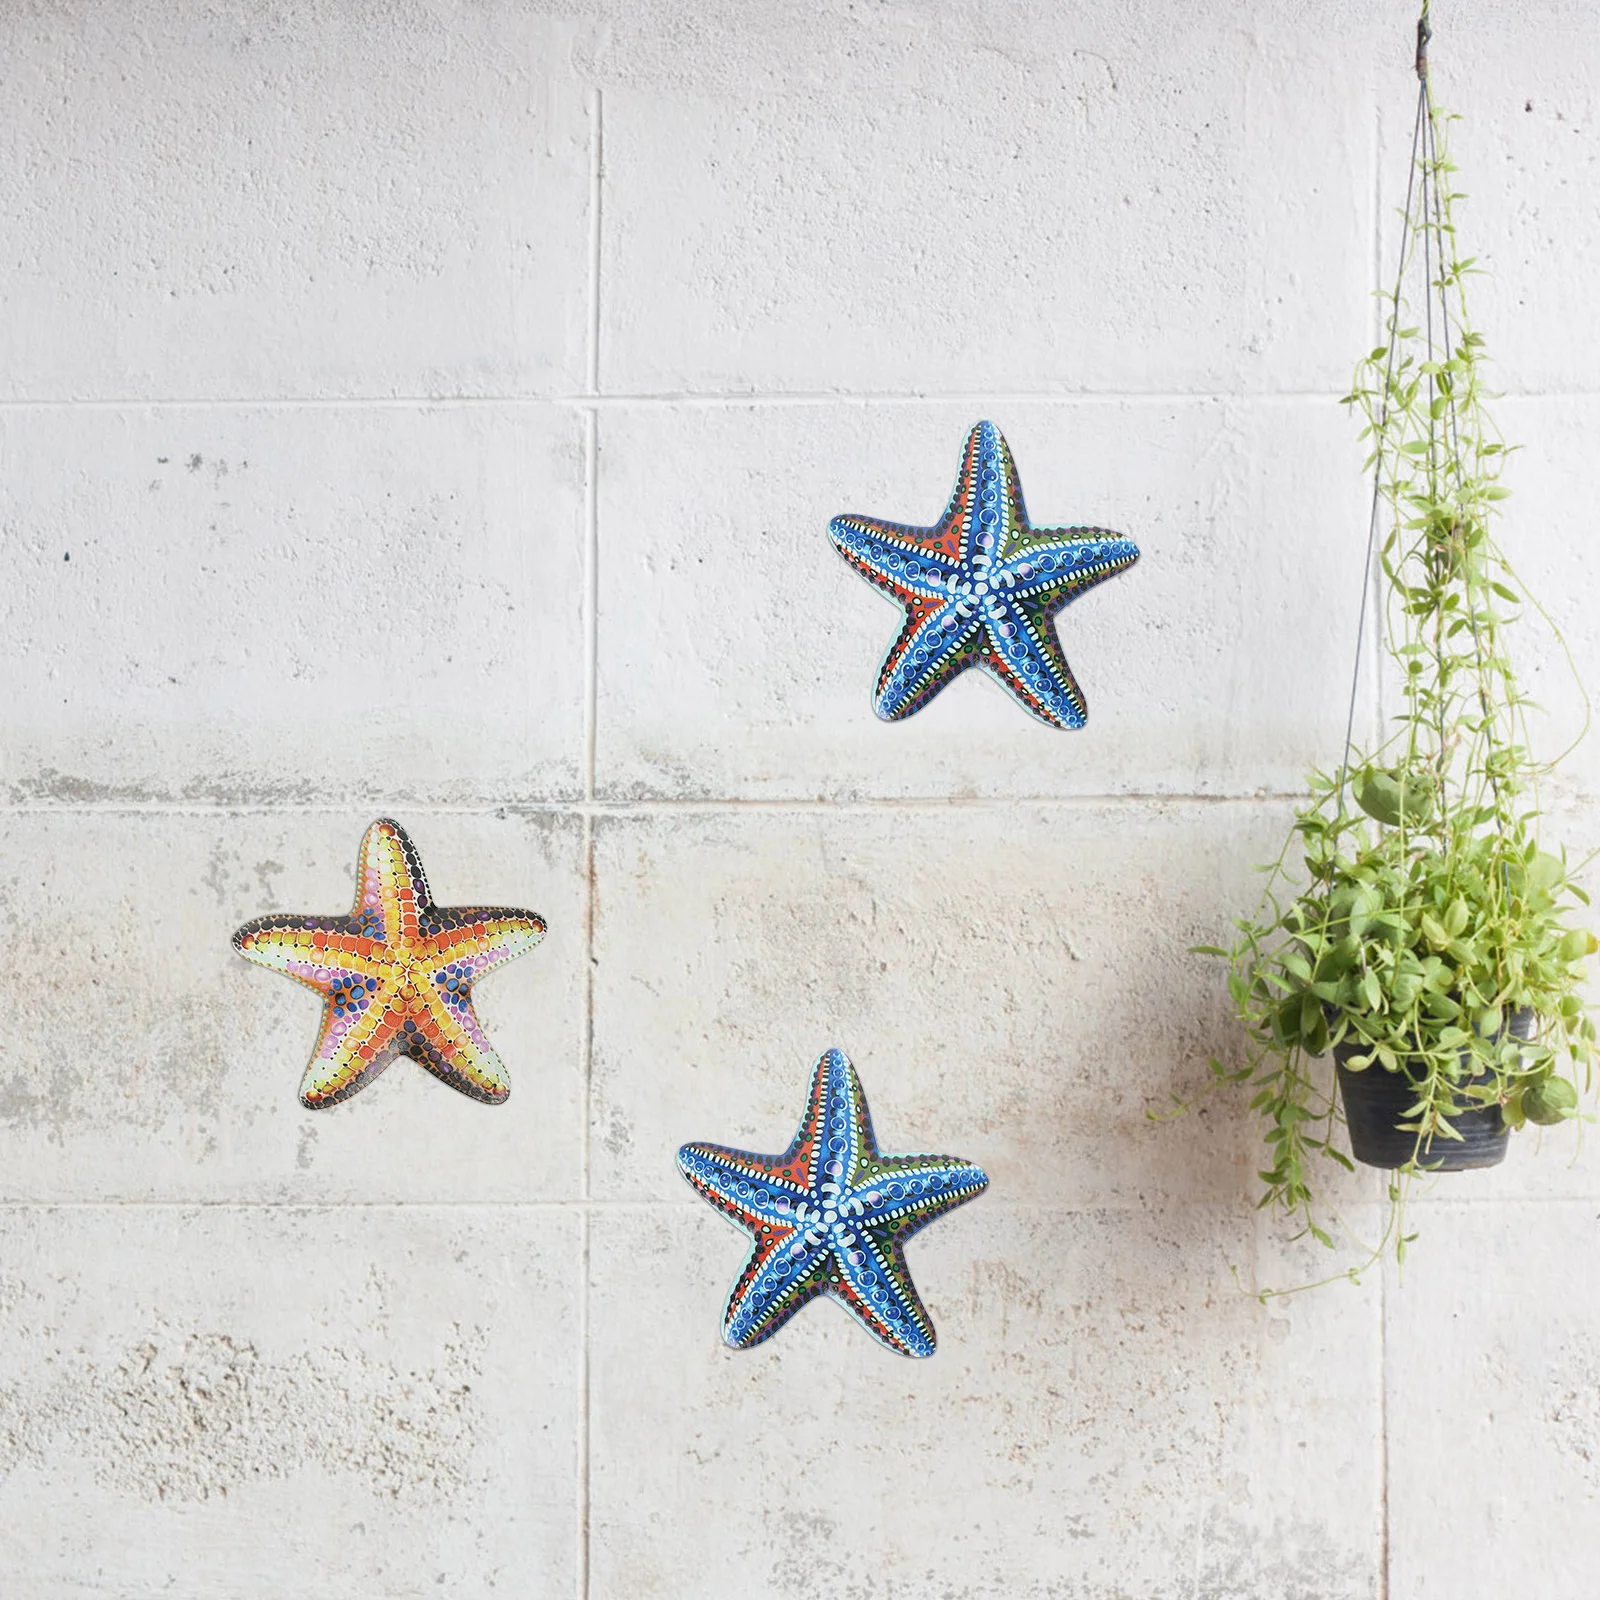 

Wall Crafts Starfish Shaped Hanging Outdoor Decor Ornaments Iron Pendants Decors Garden Adornments